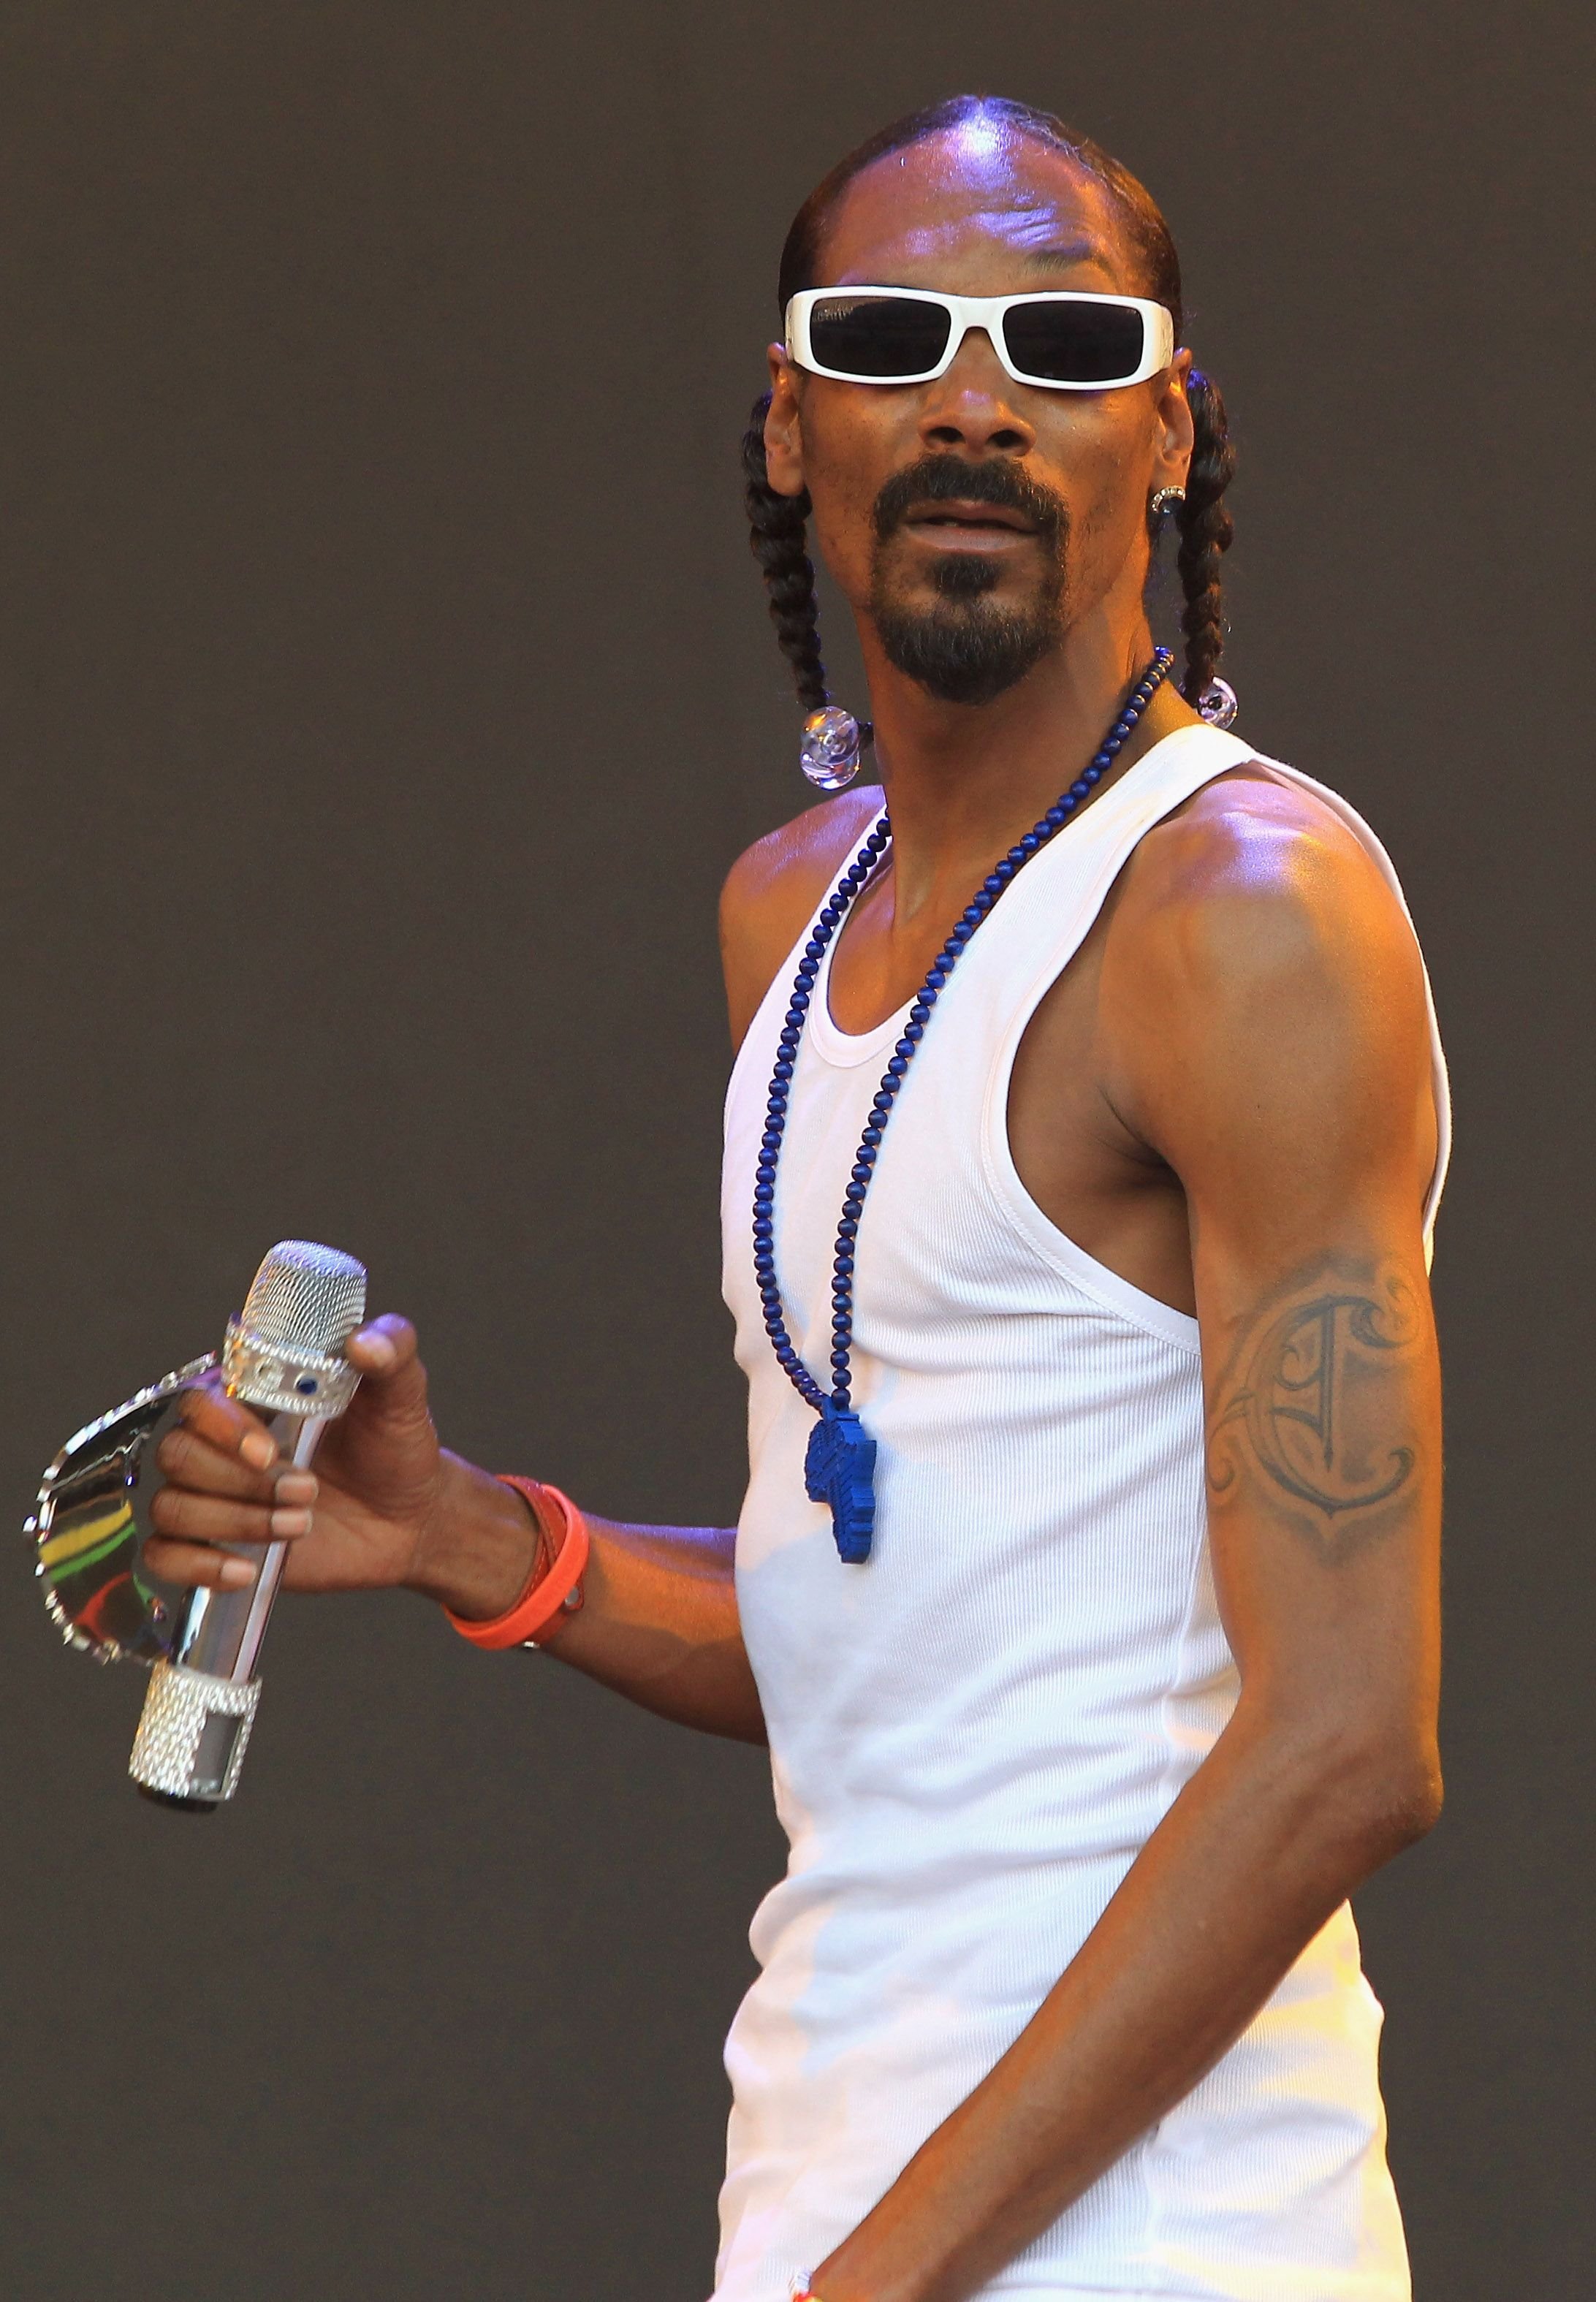 Snoop Dogg at Glastonbury Festival on June 25, 2010 in England. | Photo: Getty Images